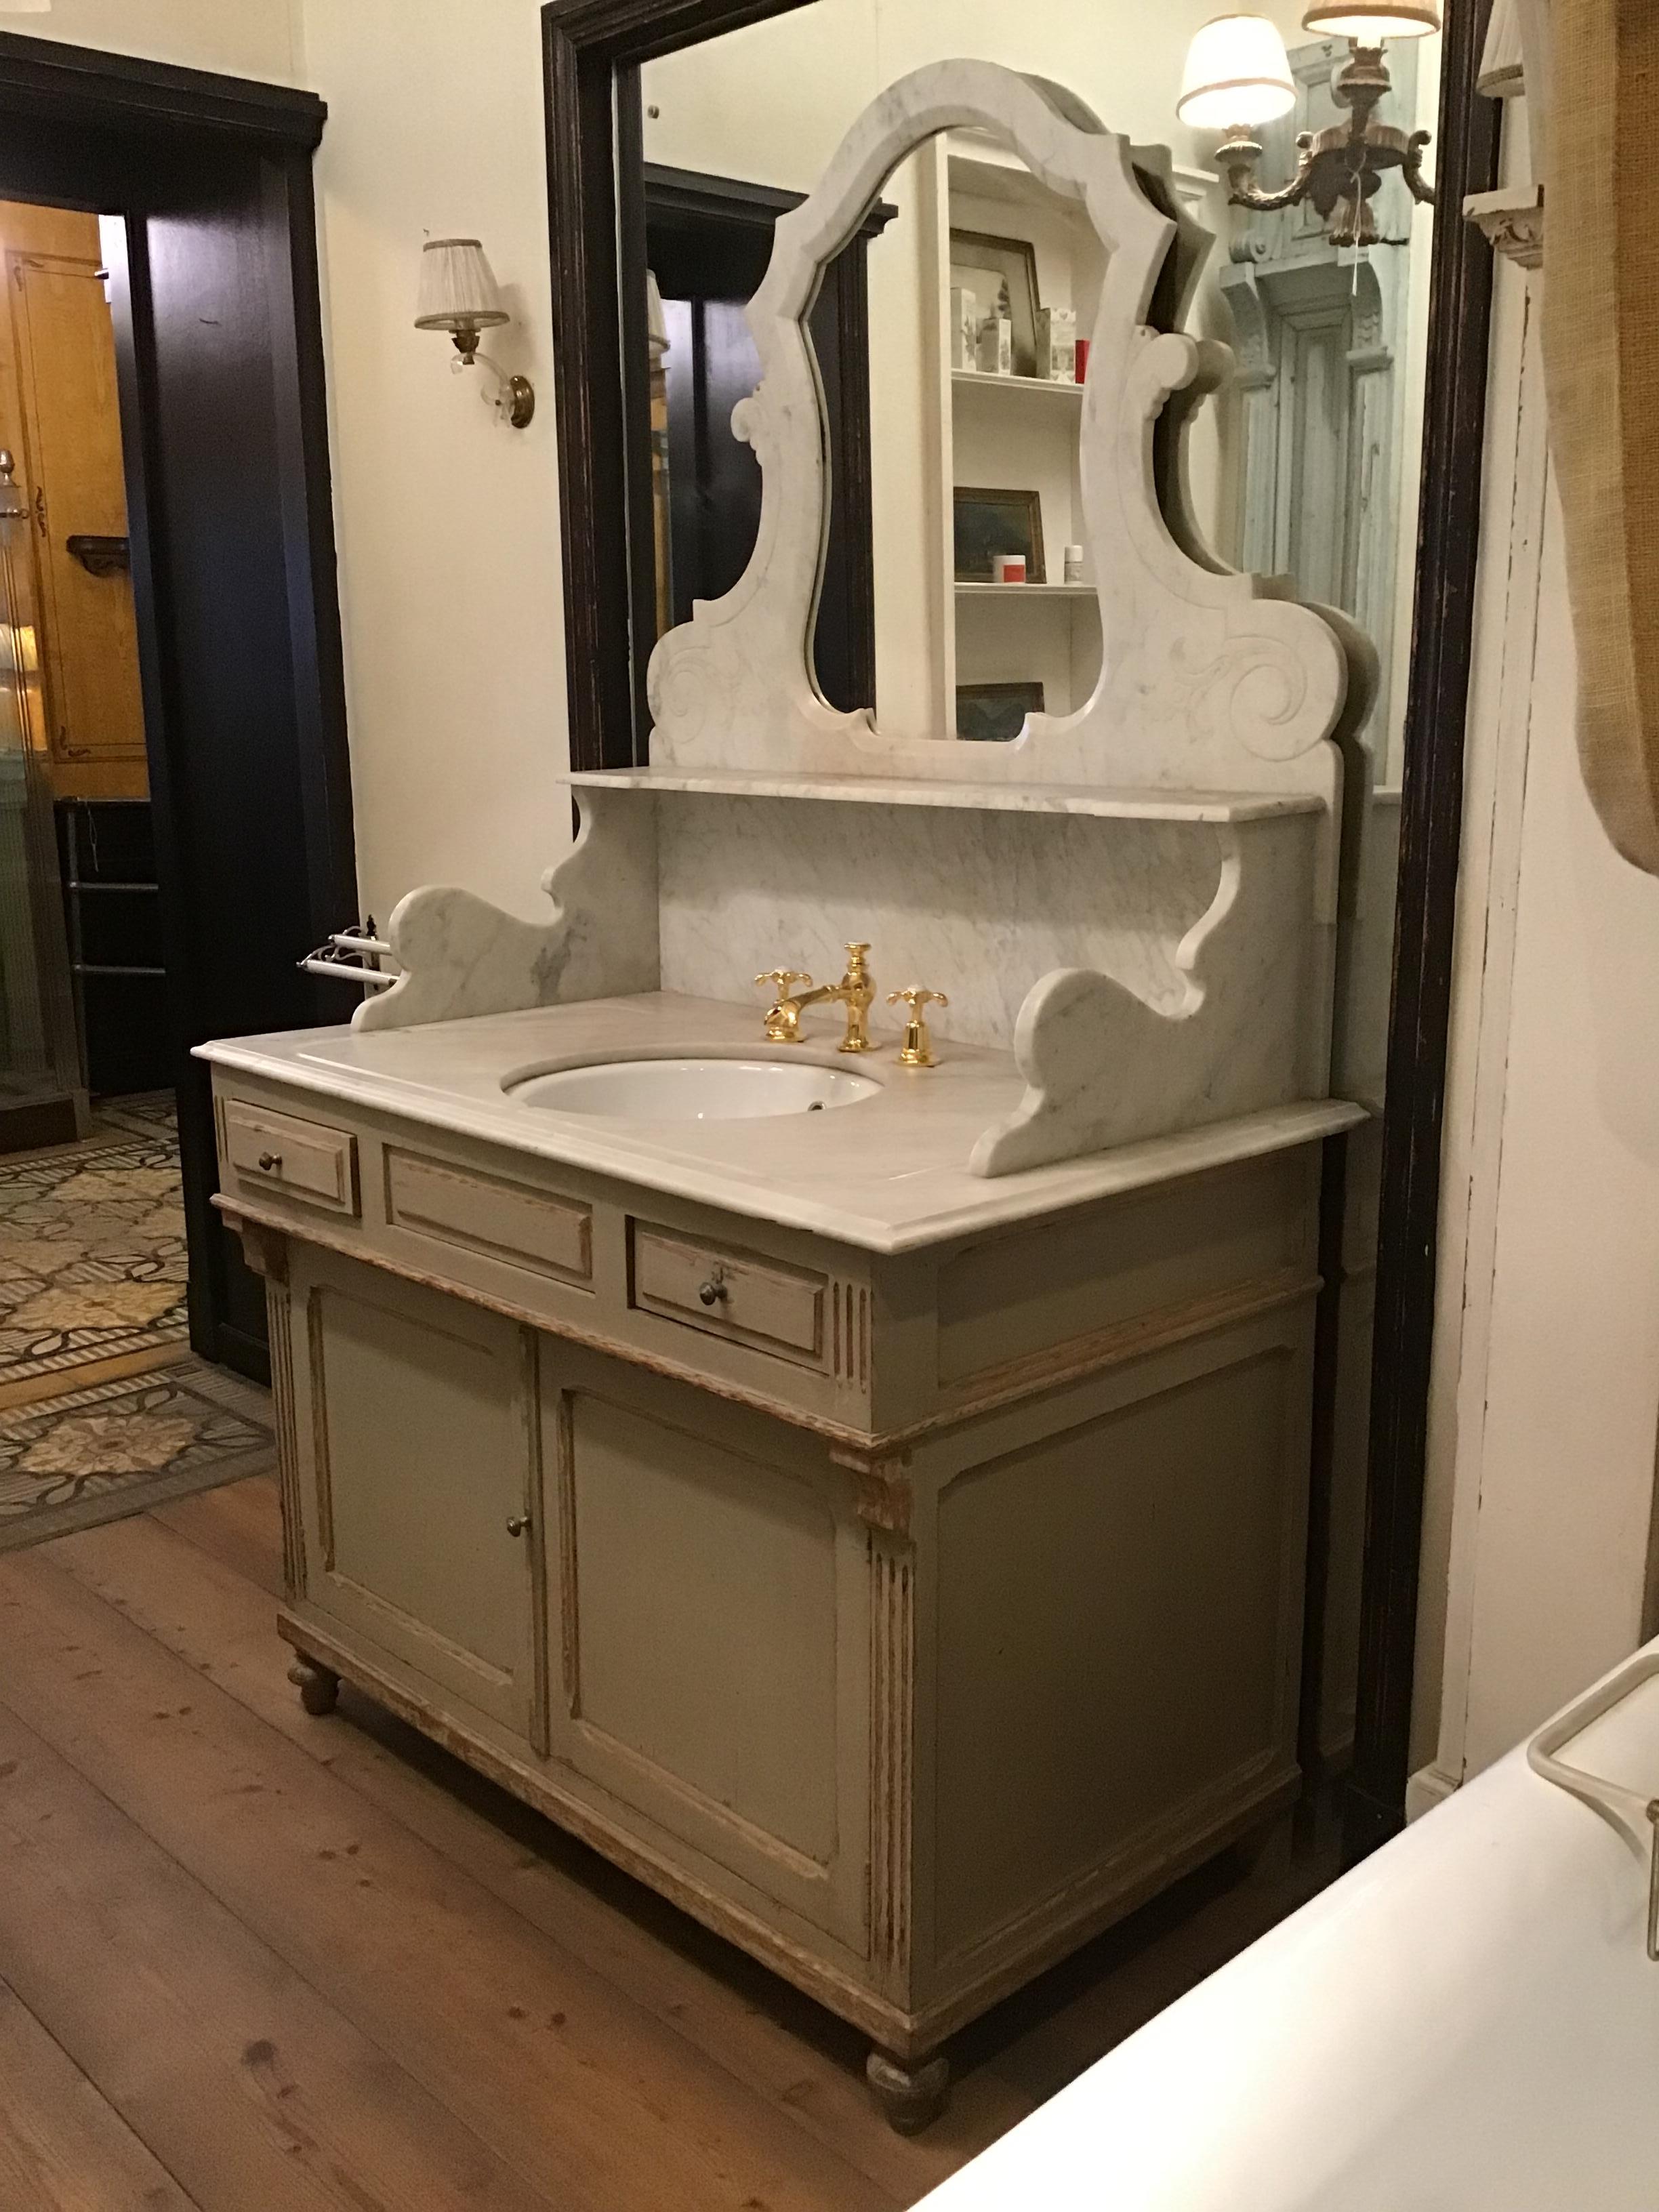 19th century French hand painted cupboard sink with original marble top and mirror. 1890s.